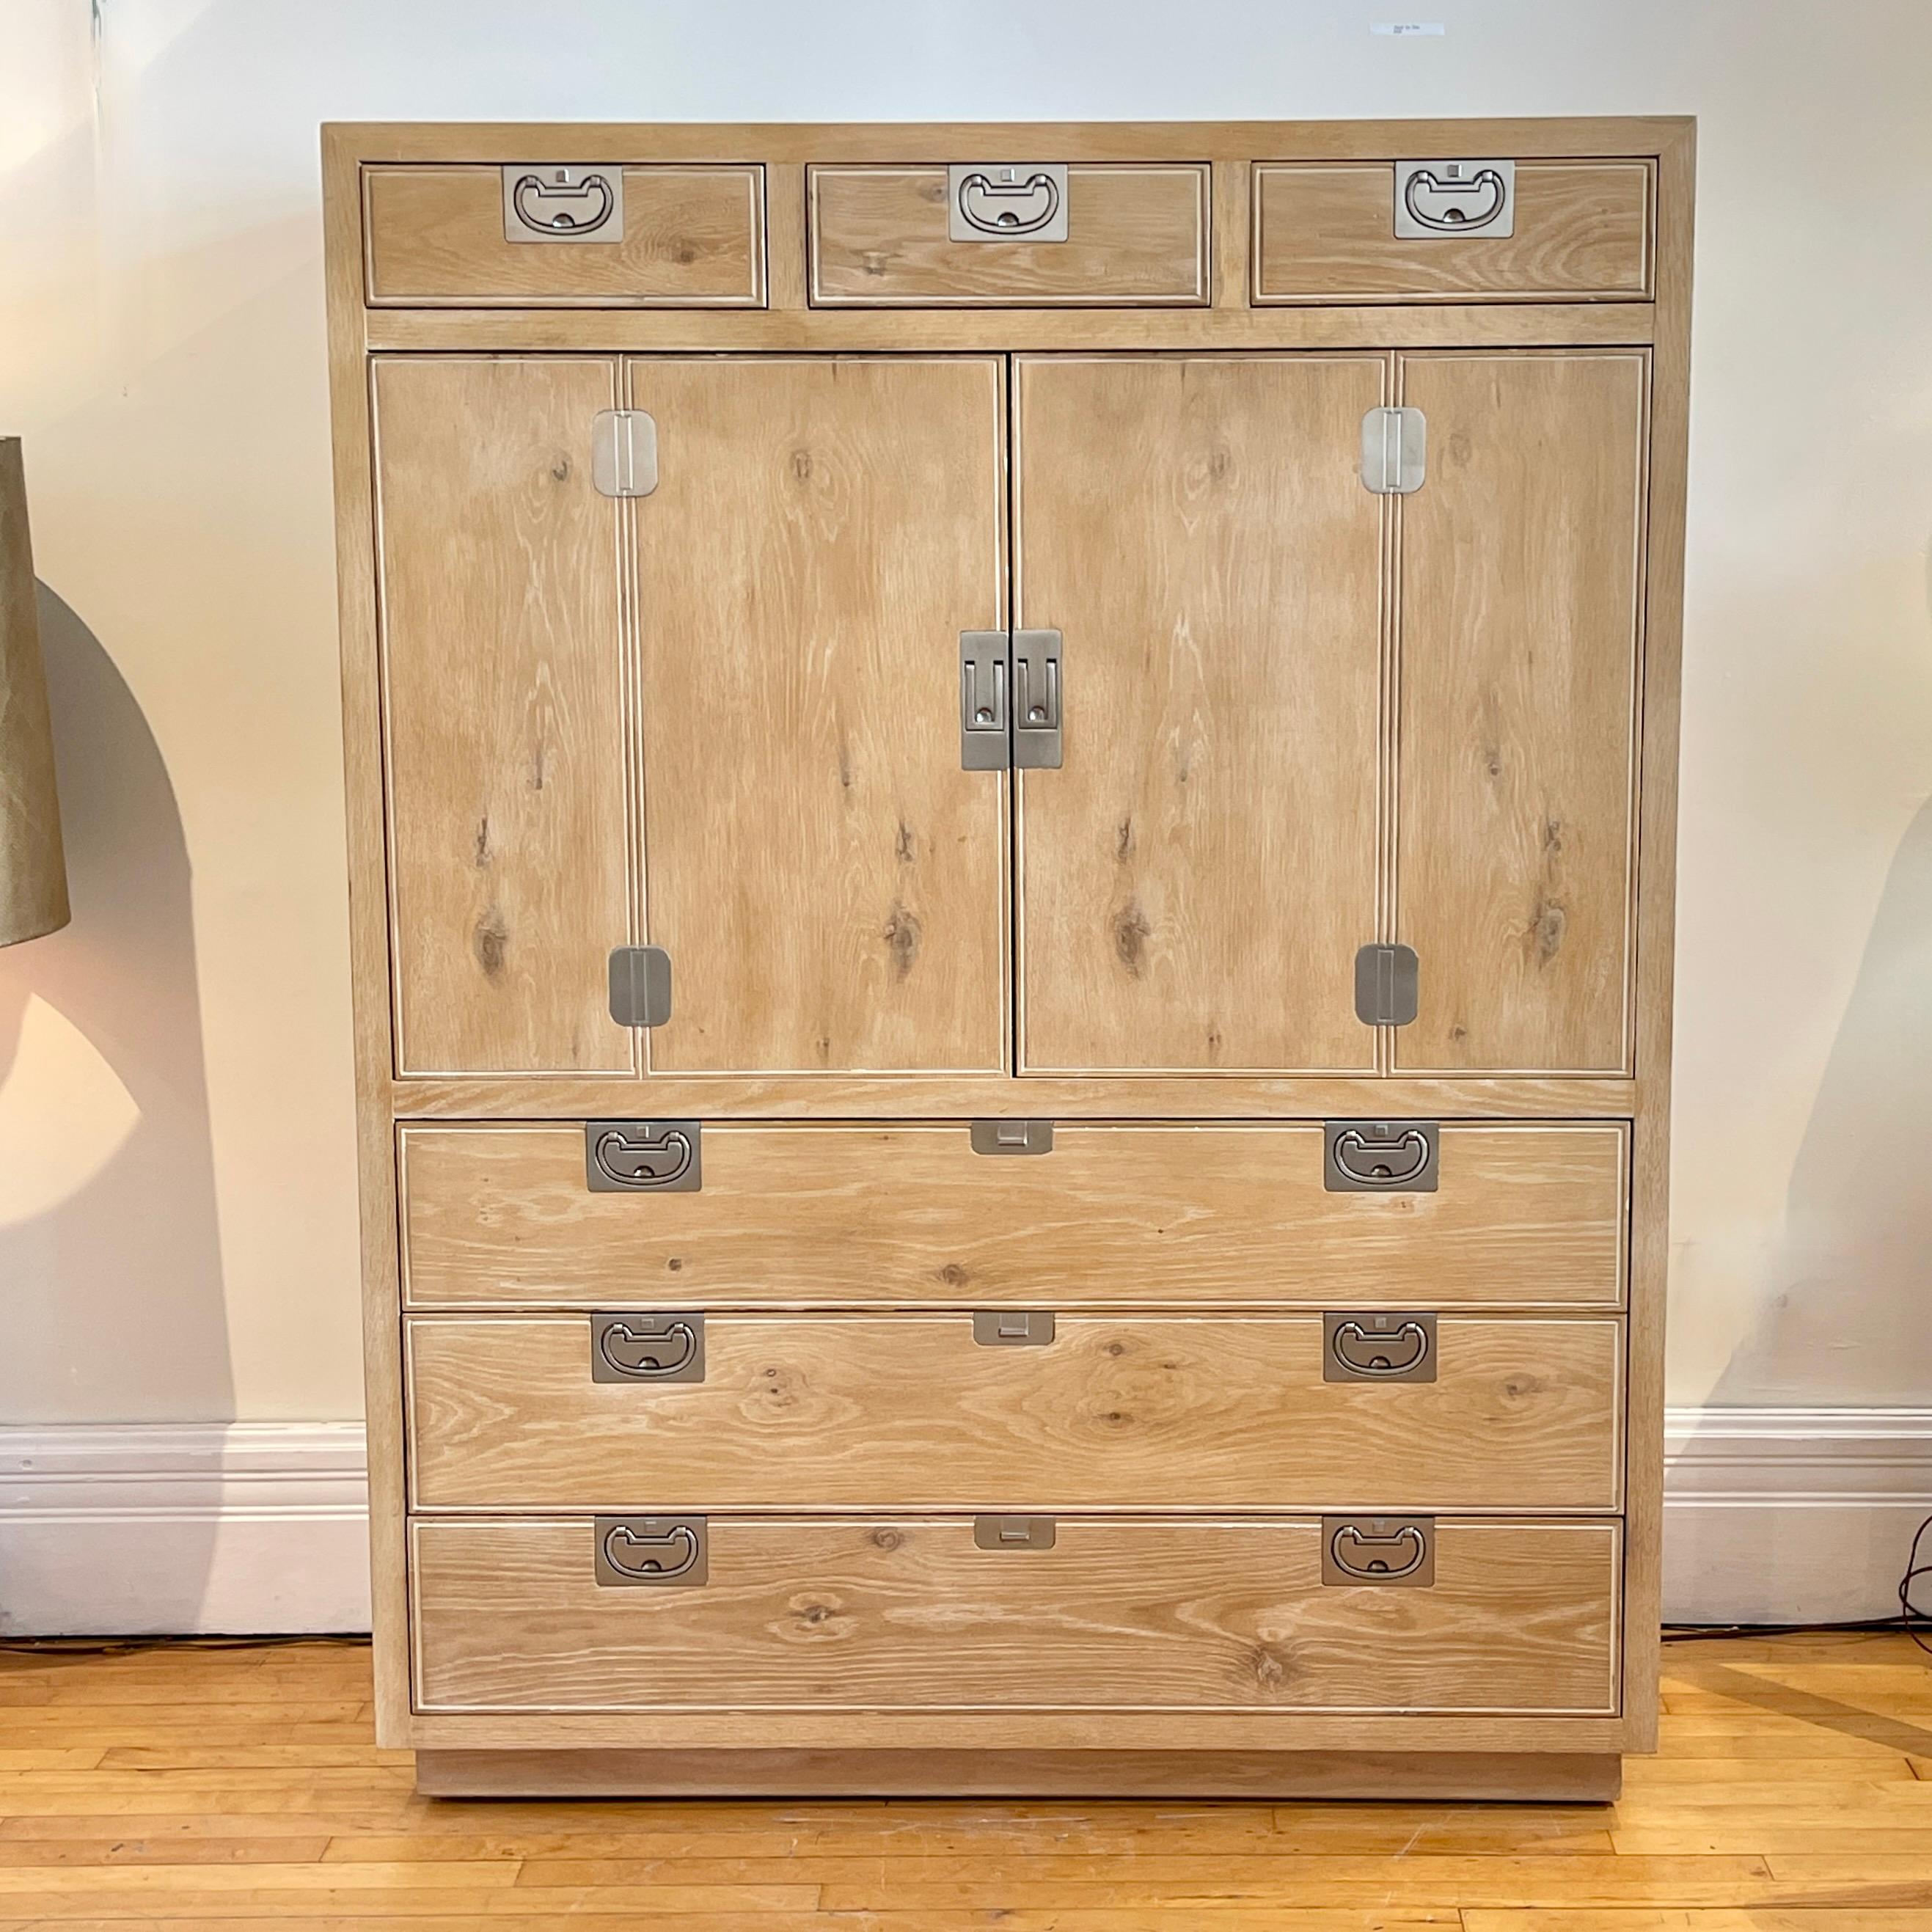 Stunning and solid bleached and cerused oak large cabinet with drawers, Consists of three charming upper drawers, with two doors that open wide. Inside is one movable shelf with removable sections. Shelf can also be easily removed entirely so